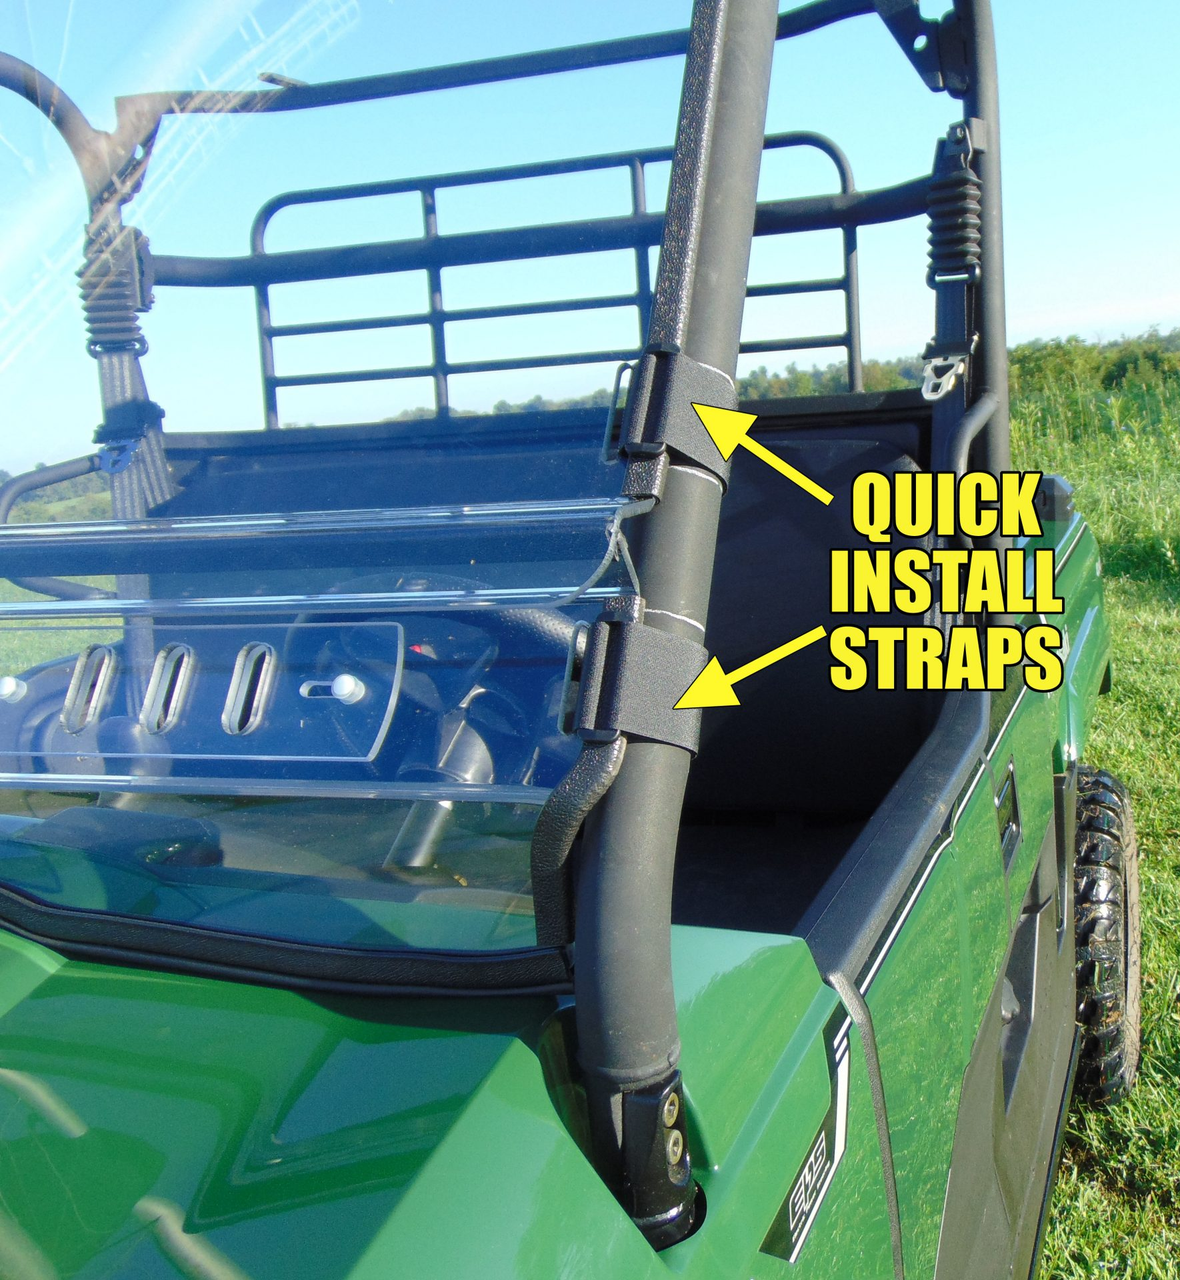 3 Star side x side Hisun Axis 750 Crew/HS 750 Crew windshield quick install straps